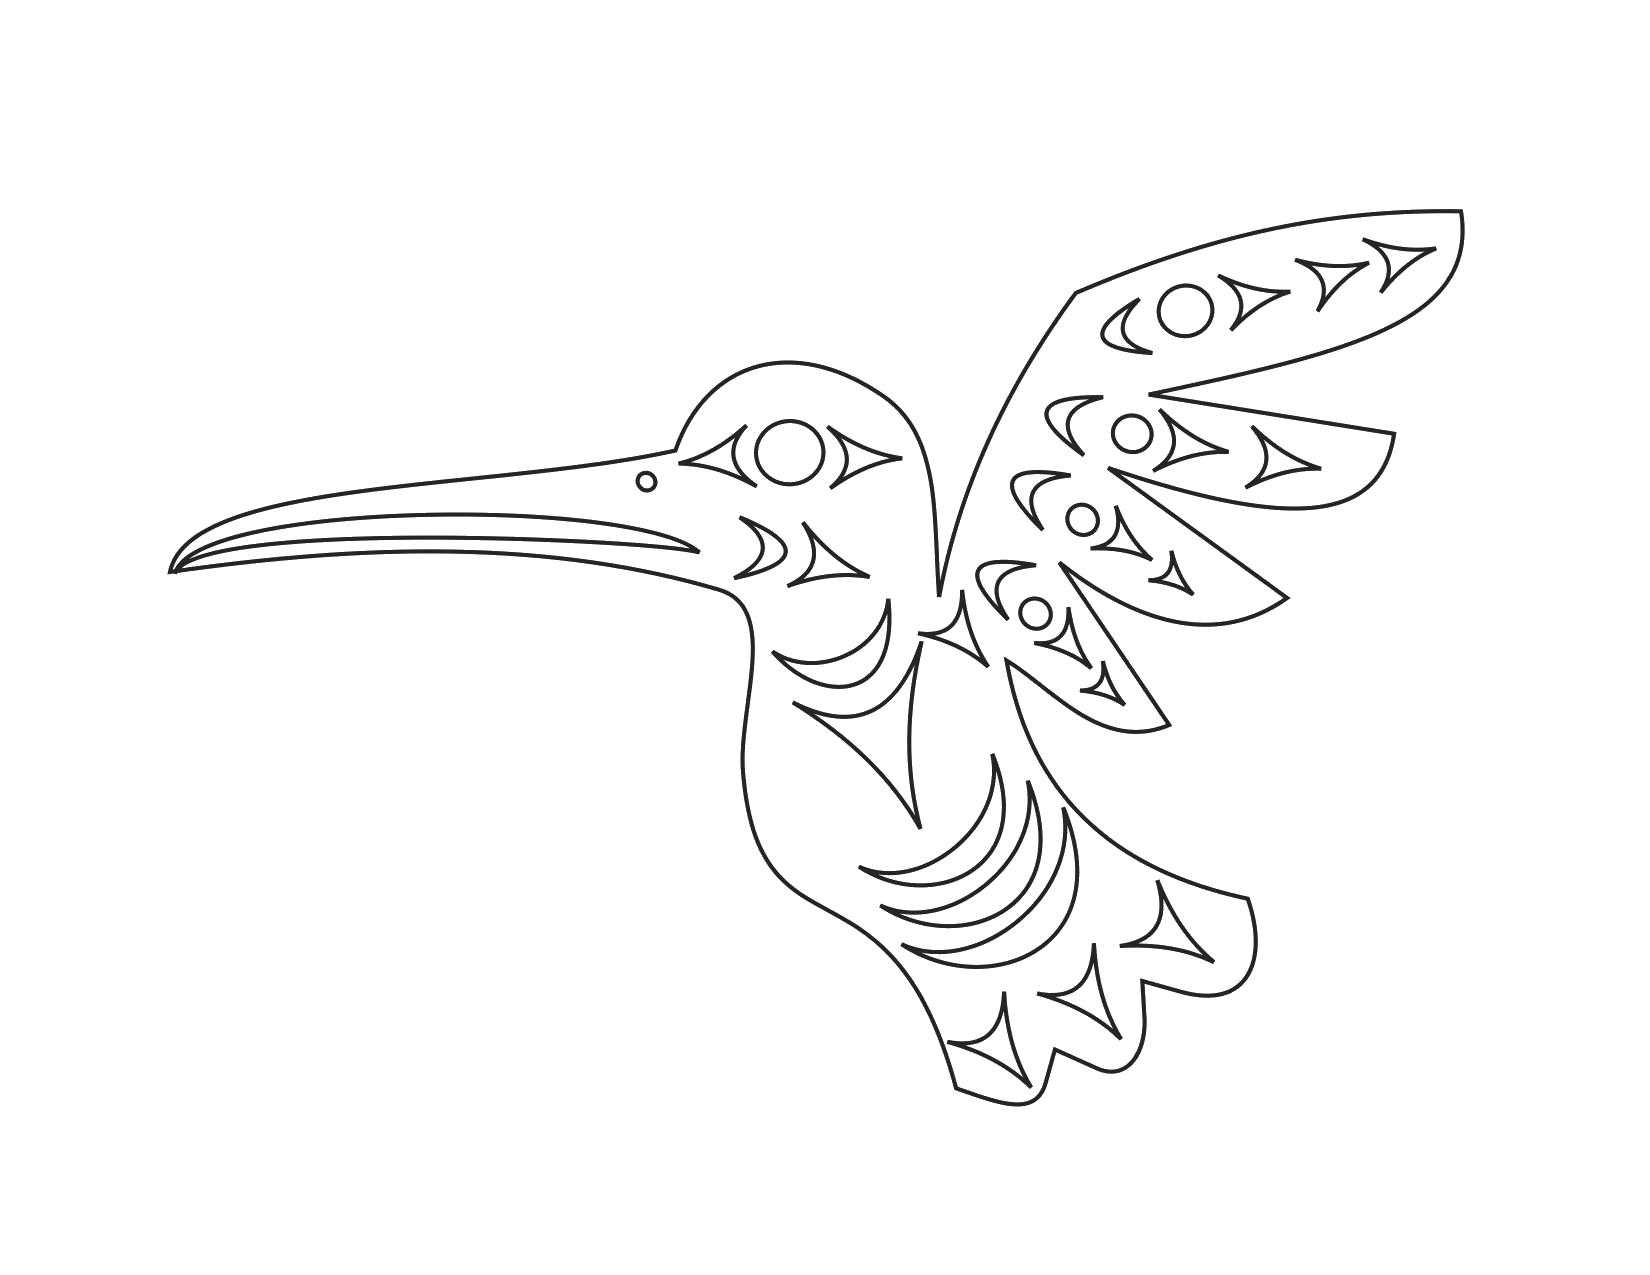 Coloring Hummingbird. Category The contours for cutting out the birds. Tags:  Hummingbird.